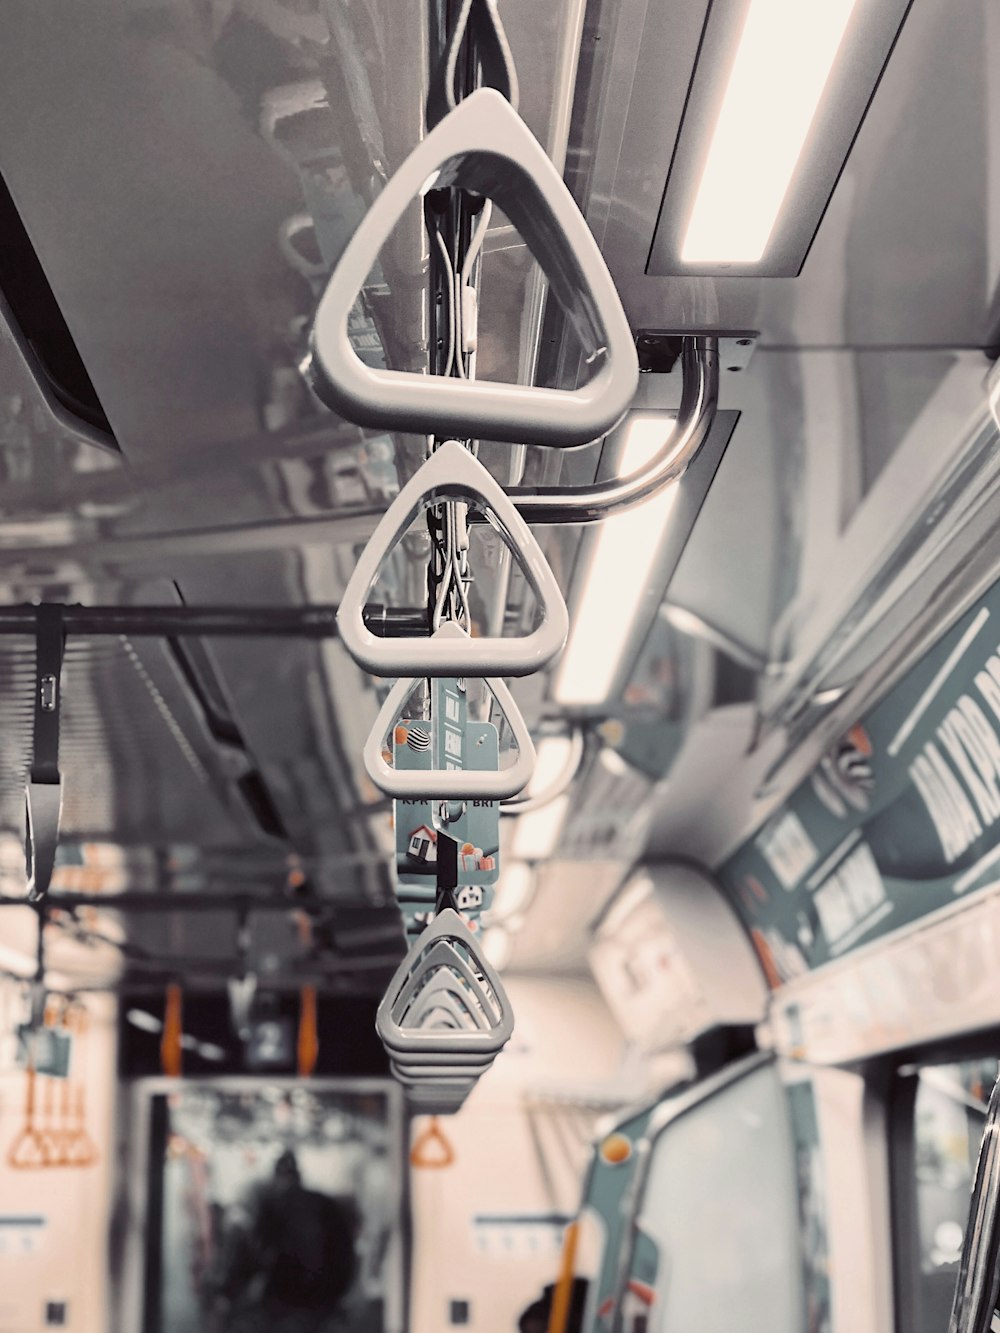 train interior with hanging support handles